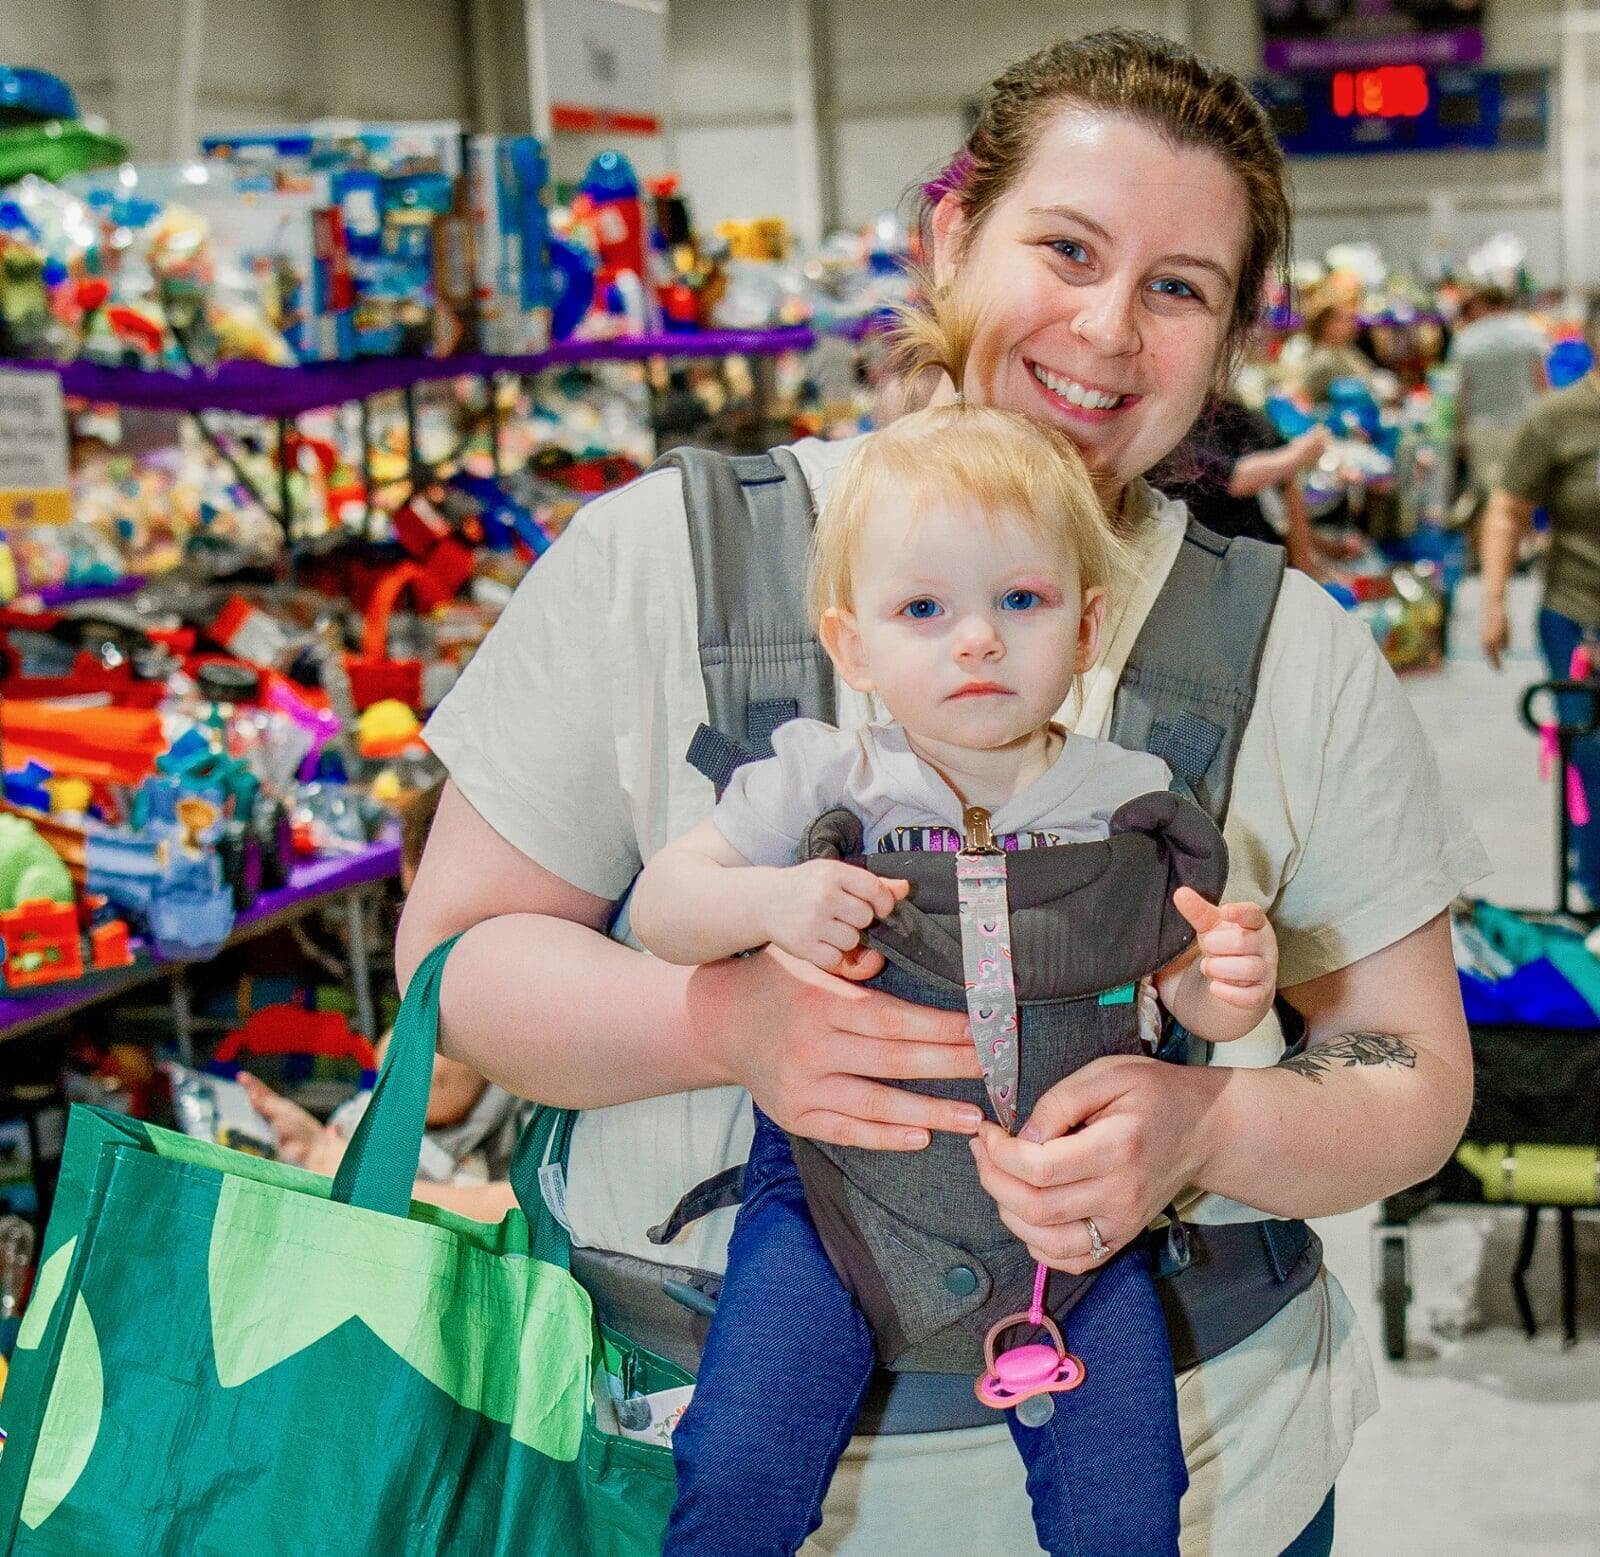 Woman carrying toddler in front carrier smiling.  Tables full of toys are in the background.